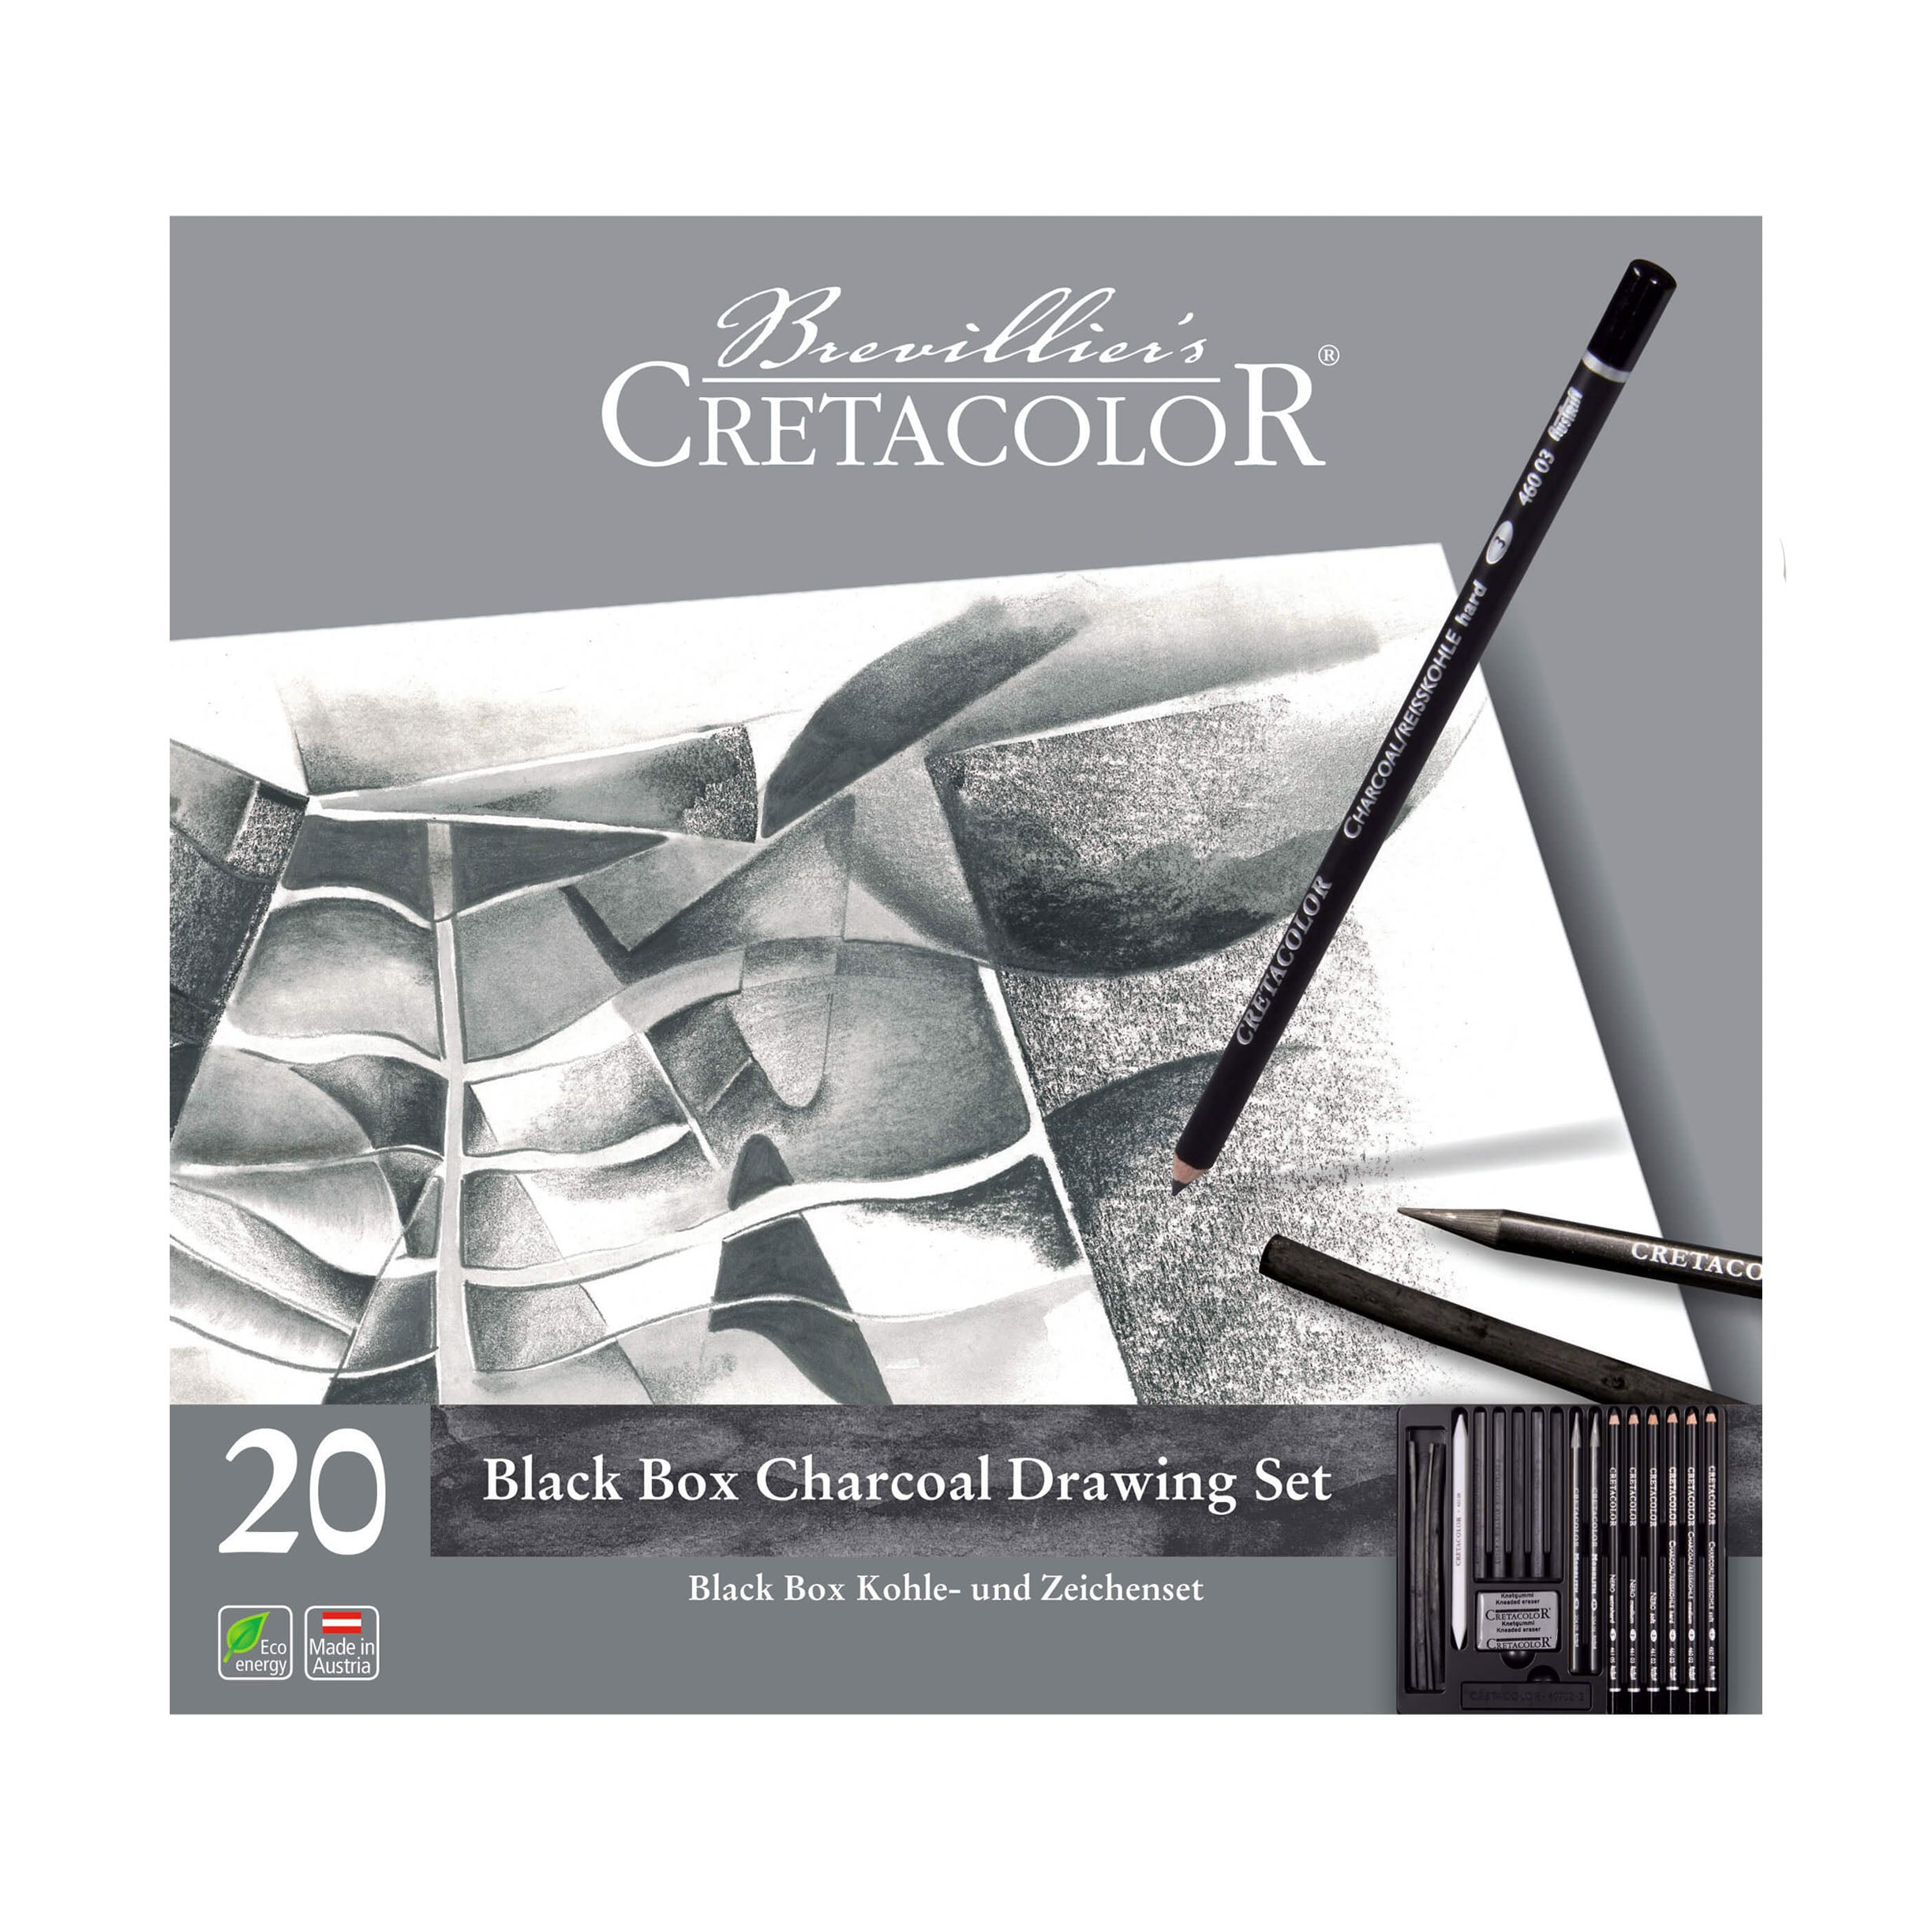 The Black Box Charcoal Drawing Set by Cretacolor! #charcoal